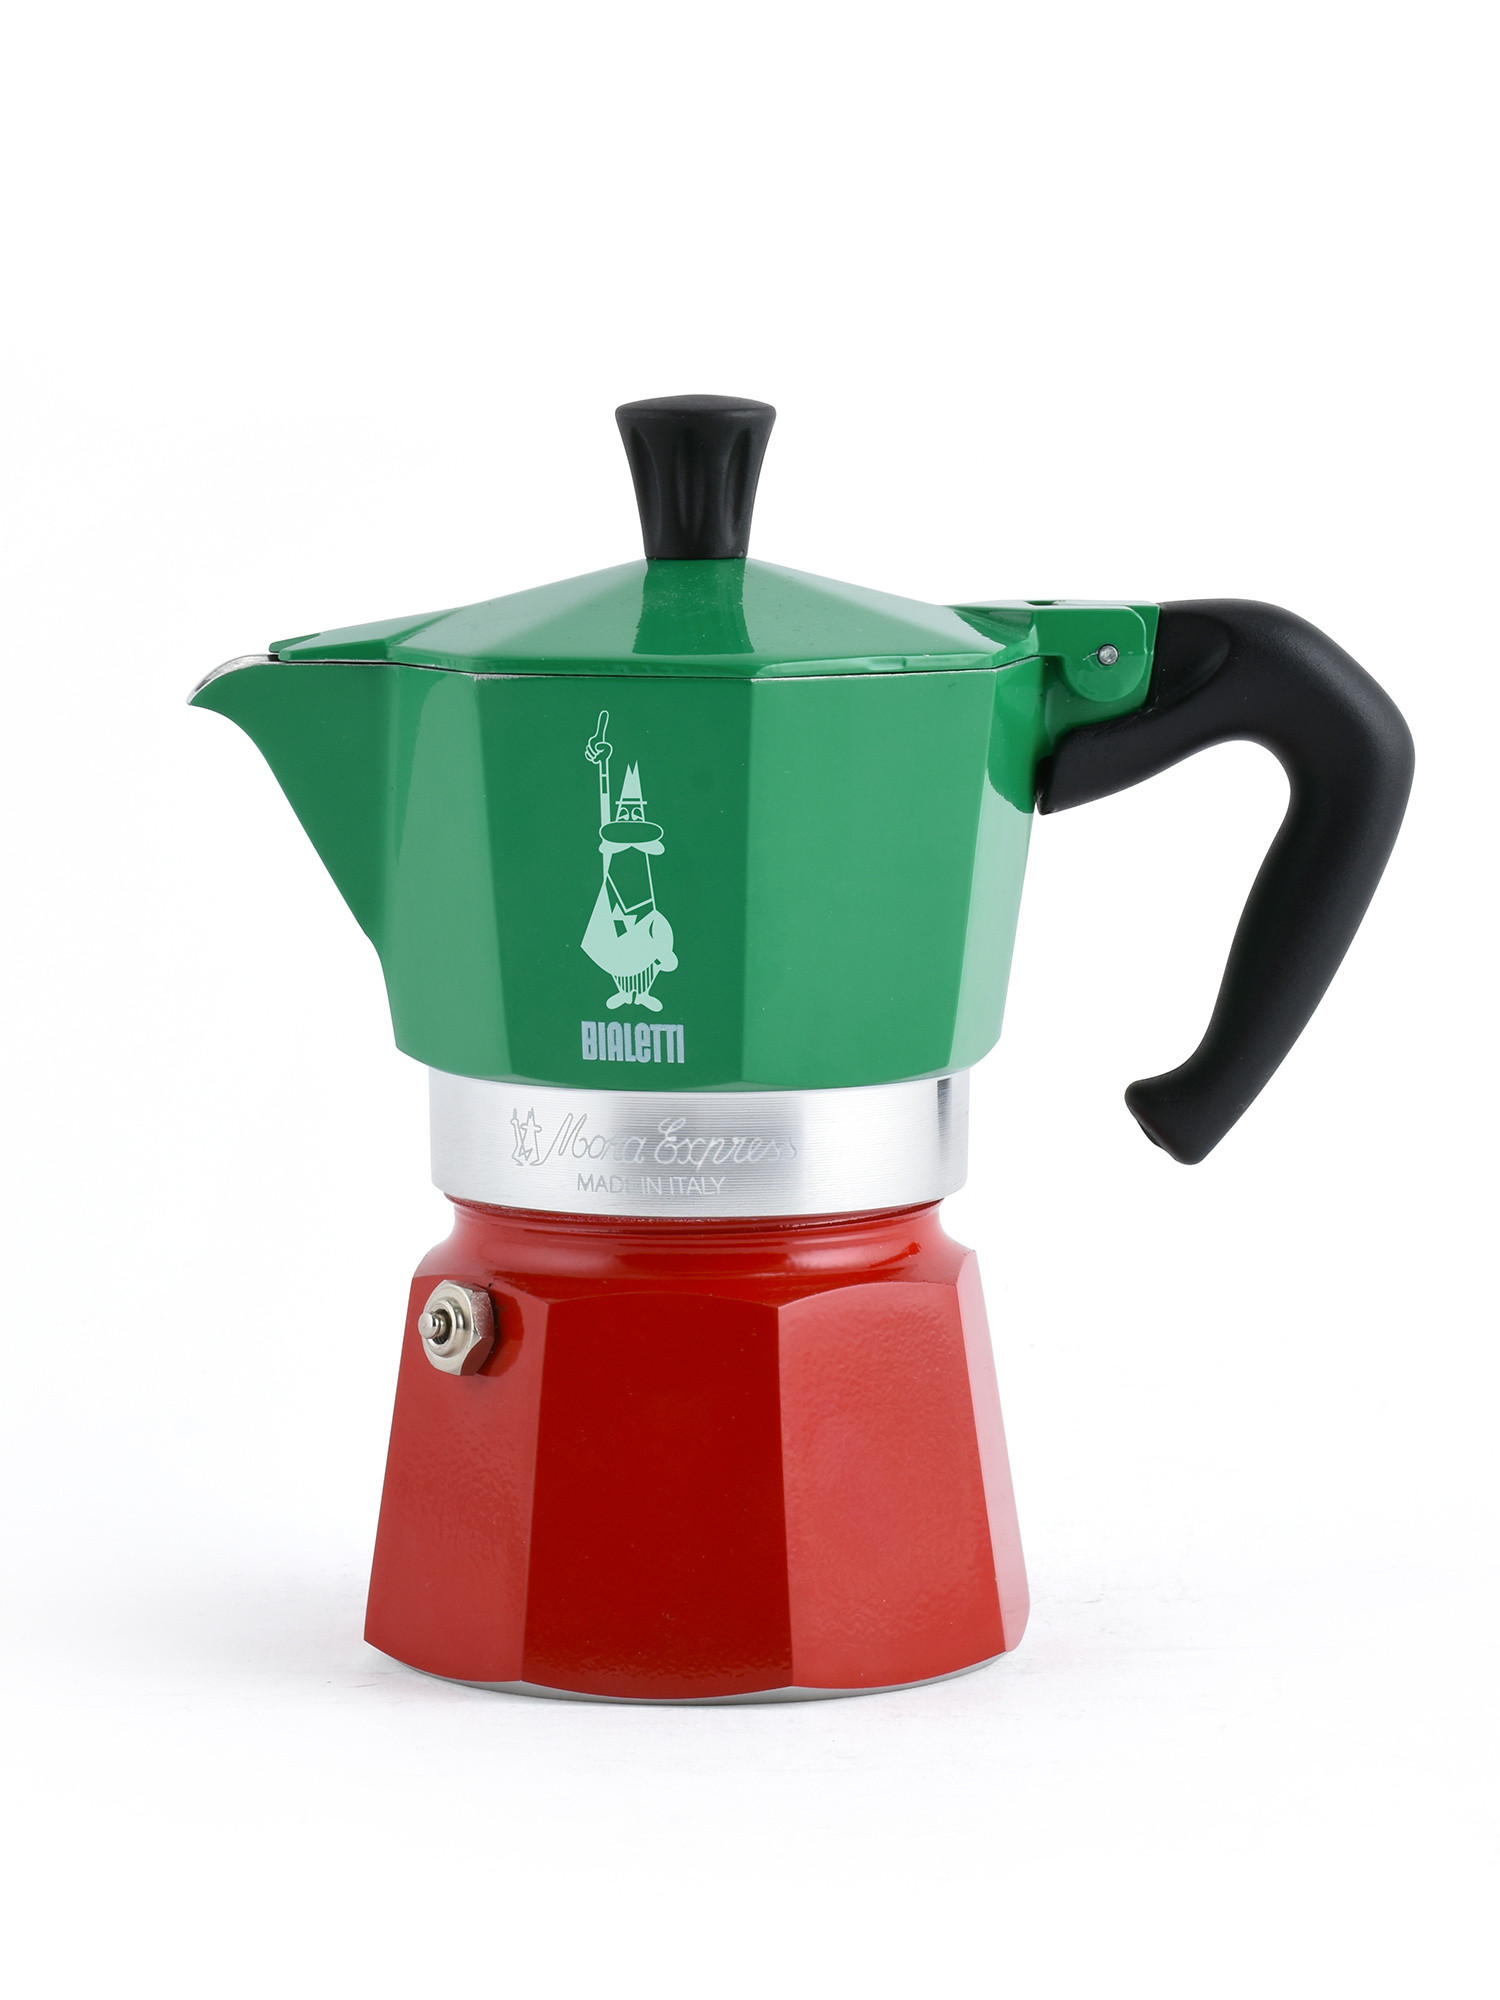 Bialetti - Moka Express Tricolore 3 cups, Multicolor, large image number 0